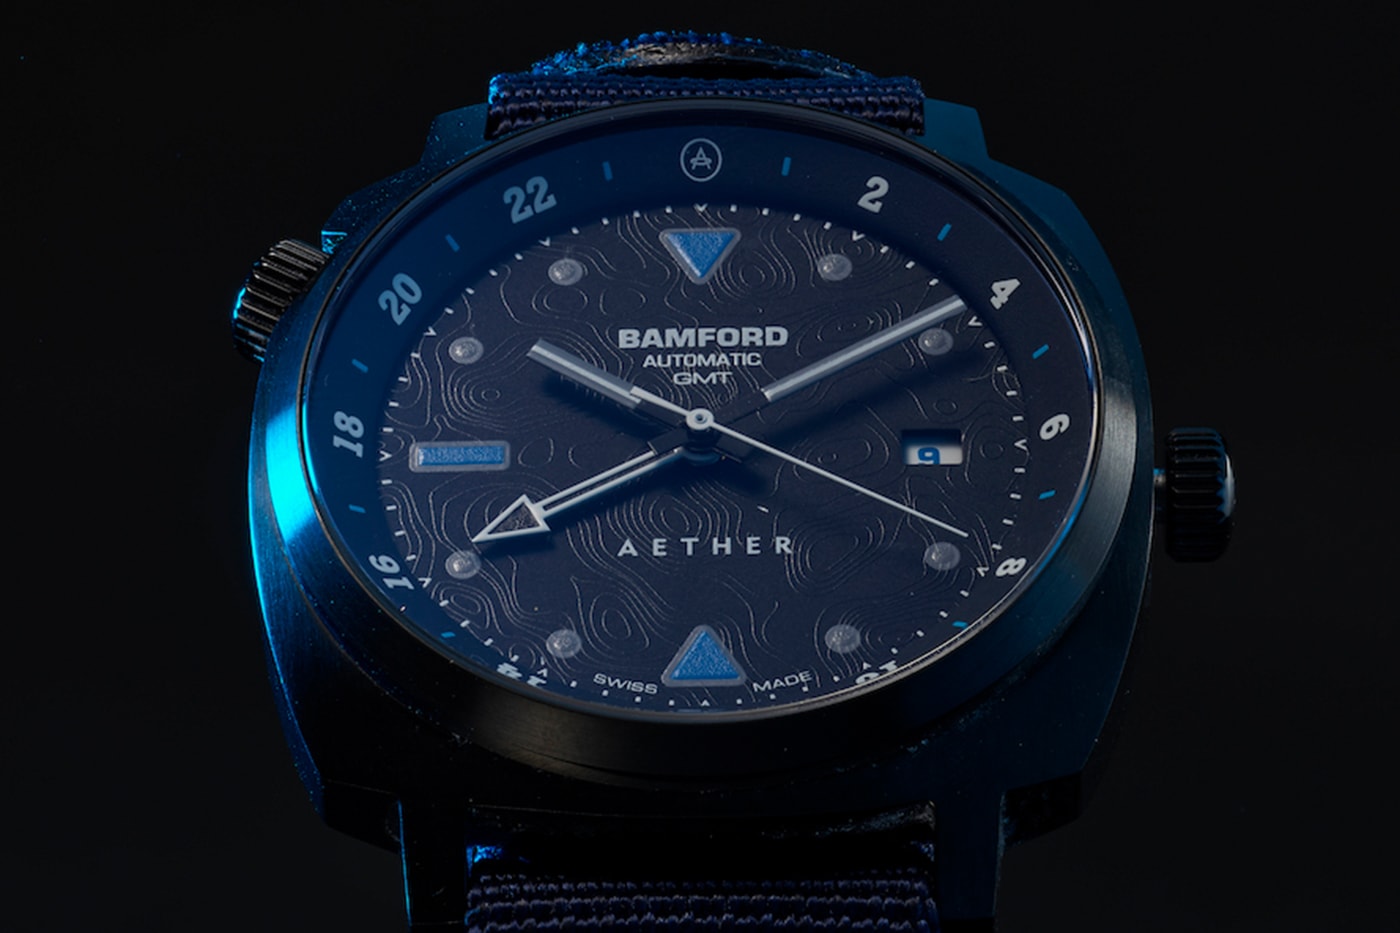 AETHER Bamford London GMT Watch Limited-Edition Collaboration Release Info